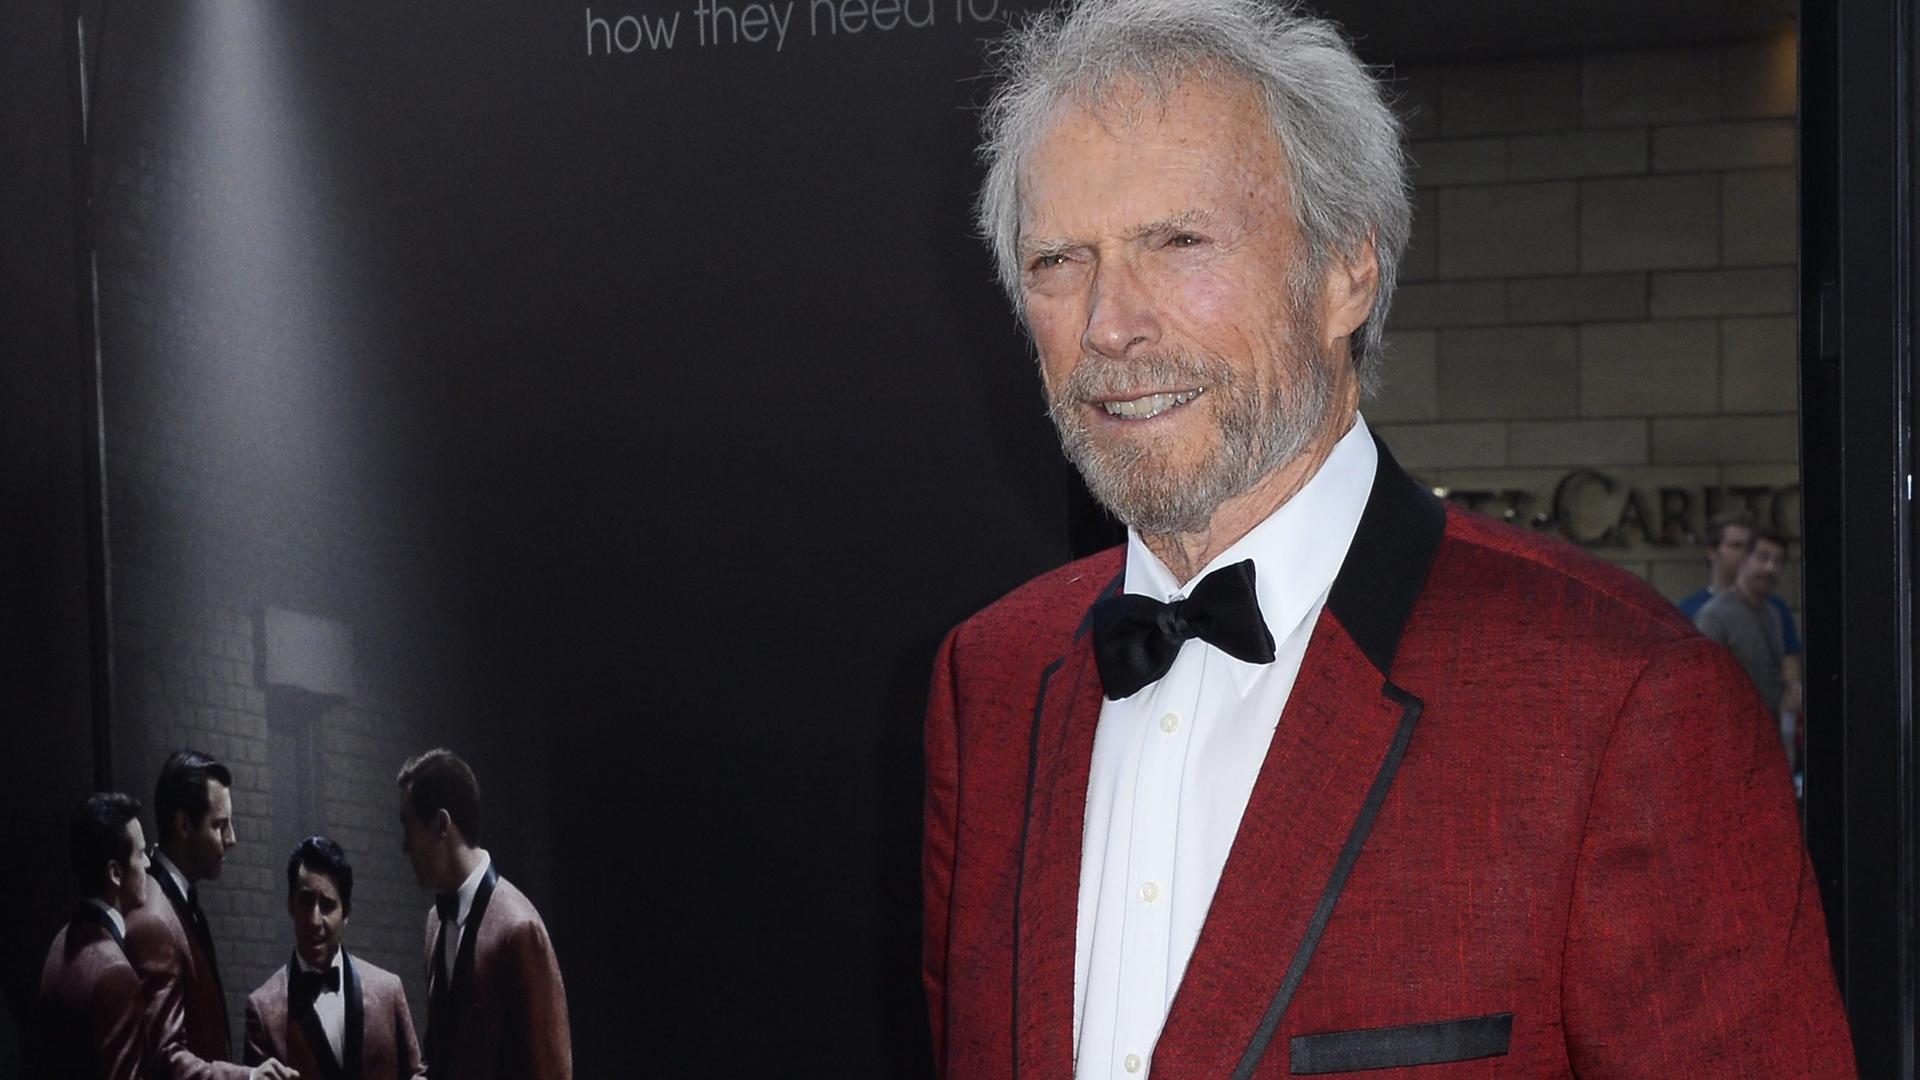 Clint Eastwood arrives for the Los Angeles Film Festival premiere of 'Jersey Boys' in Los Angeles, California